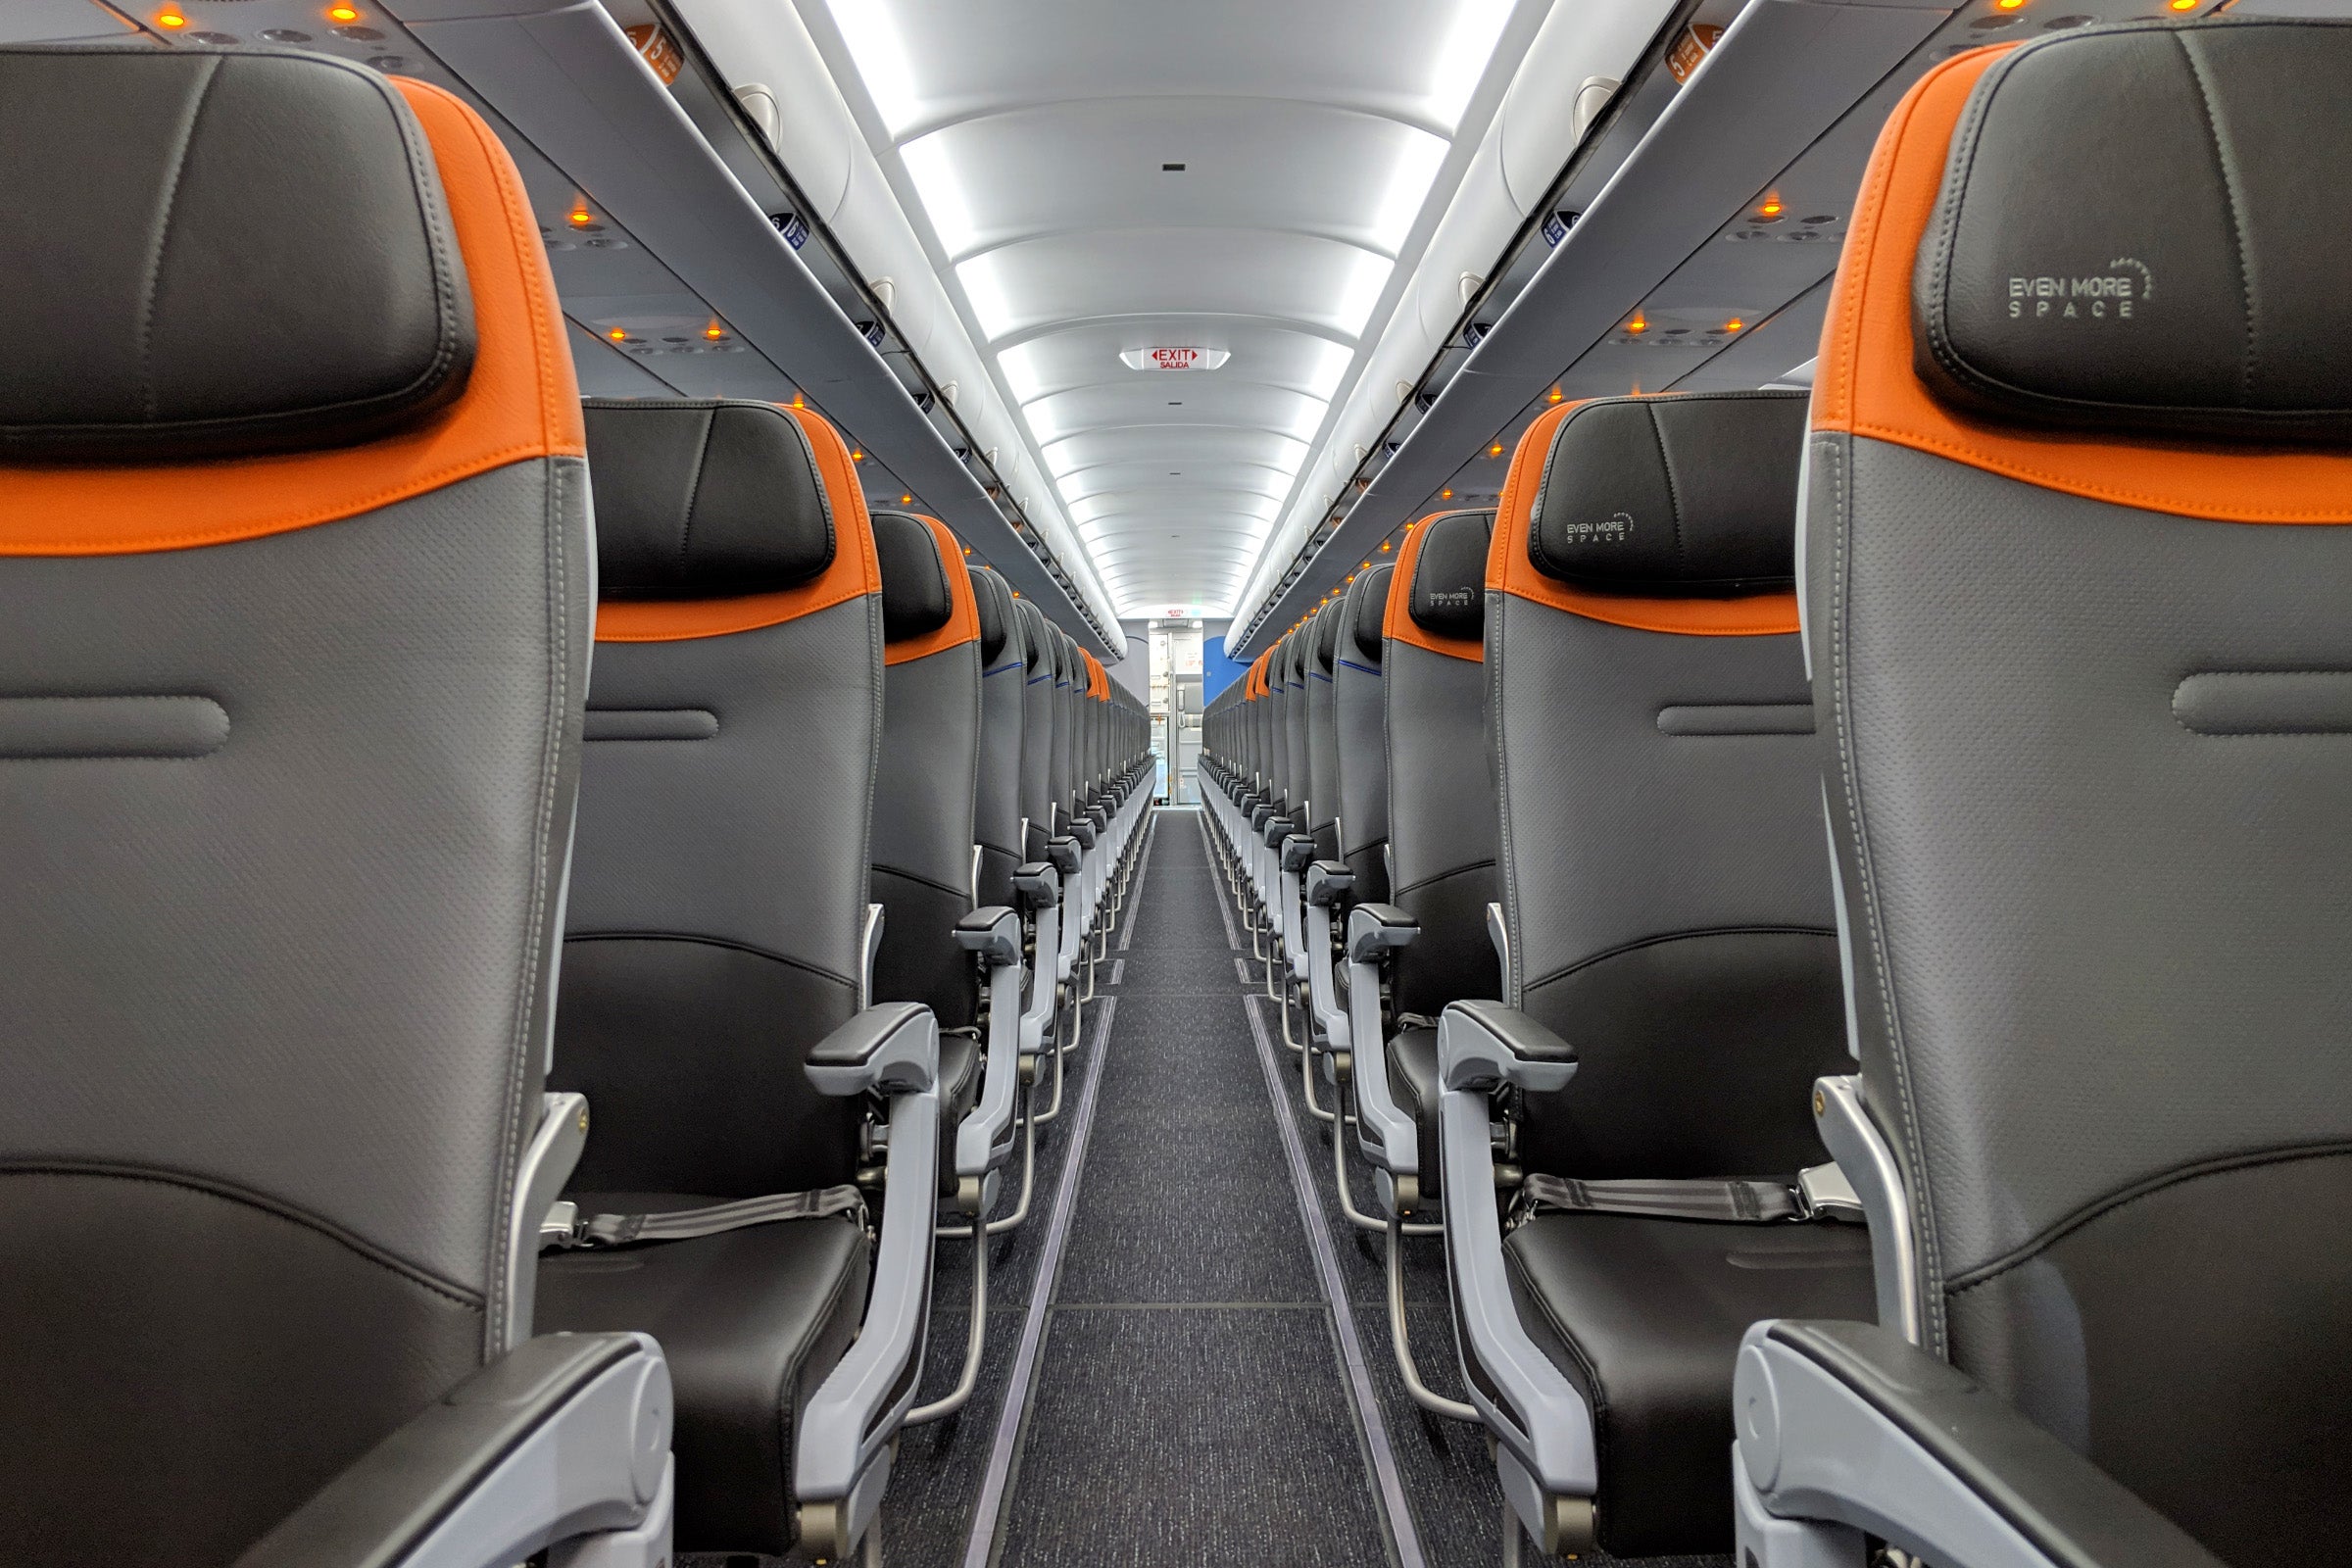 Where to Sit When Flying JetBlue's Retrofitted Airbus A320 - The Points Guy